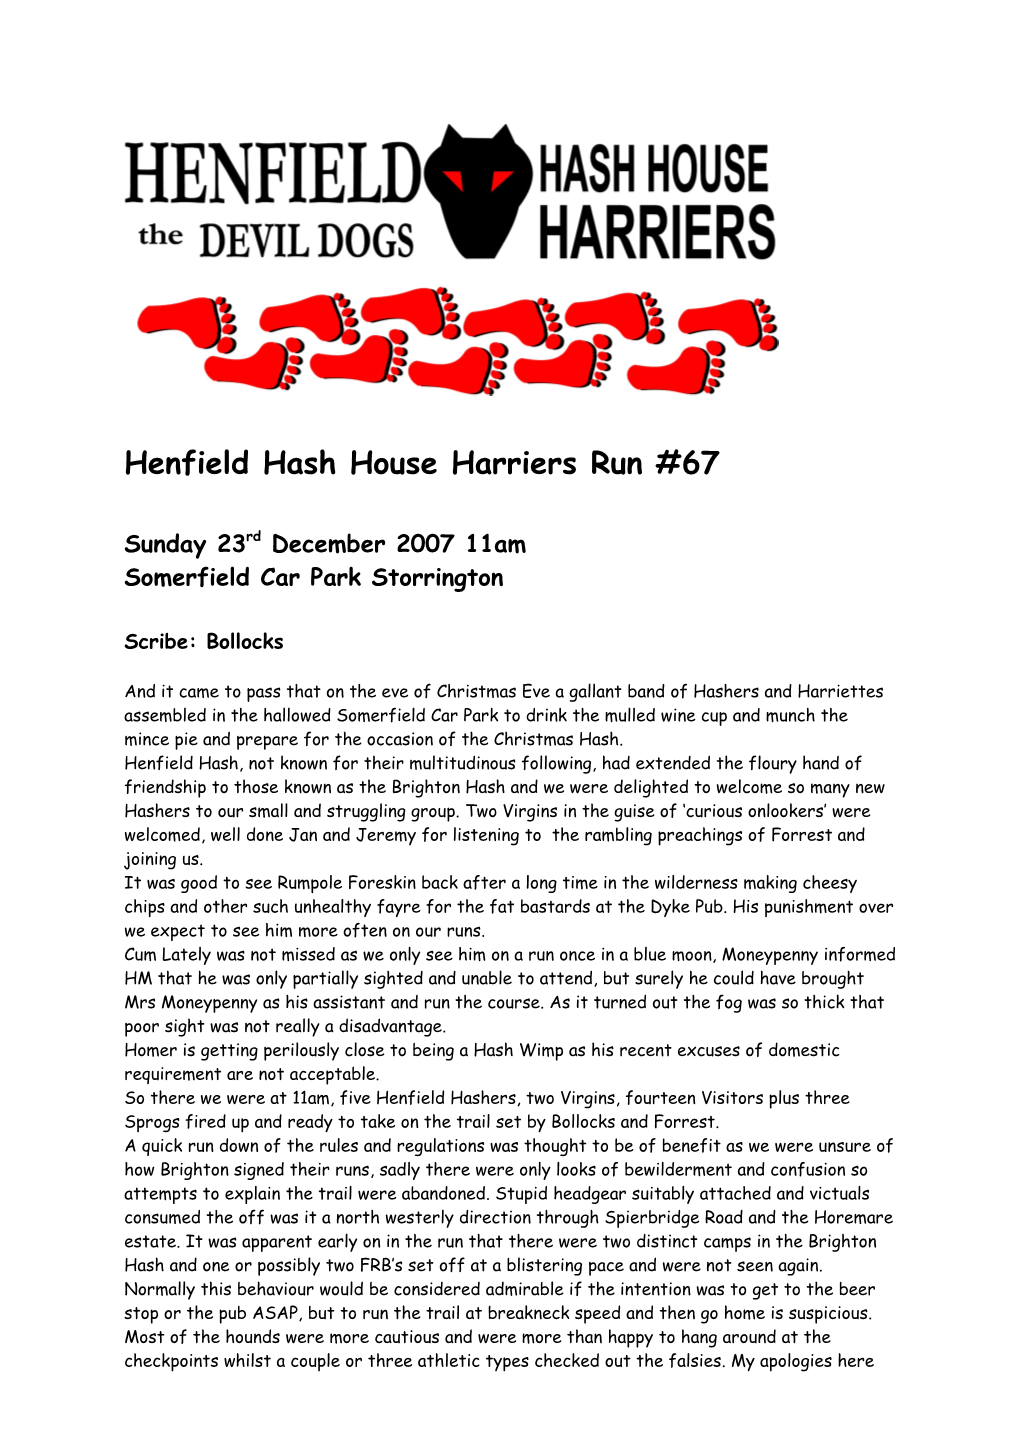 Henfield Hash House Harriers: the FIRST HASH